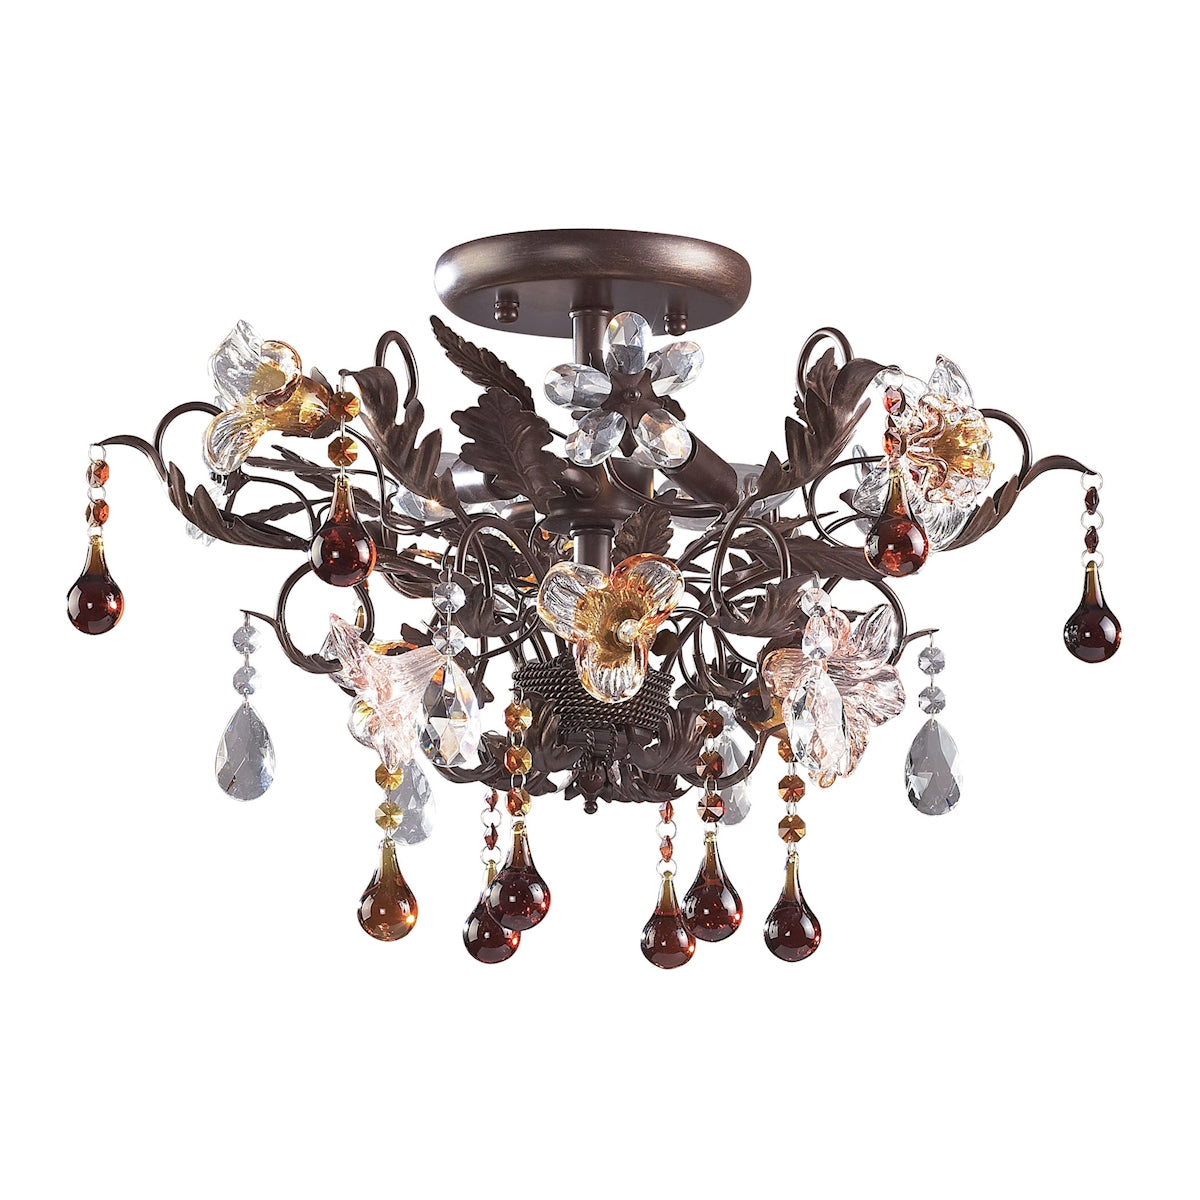 ELK Lighting 7044/3 Cristallo Fiore 3-Light Semi Flush in Deep Rust with Clear and Amber Florets